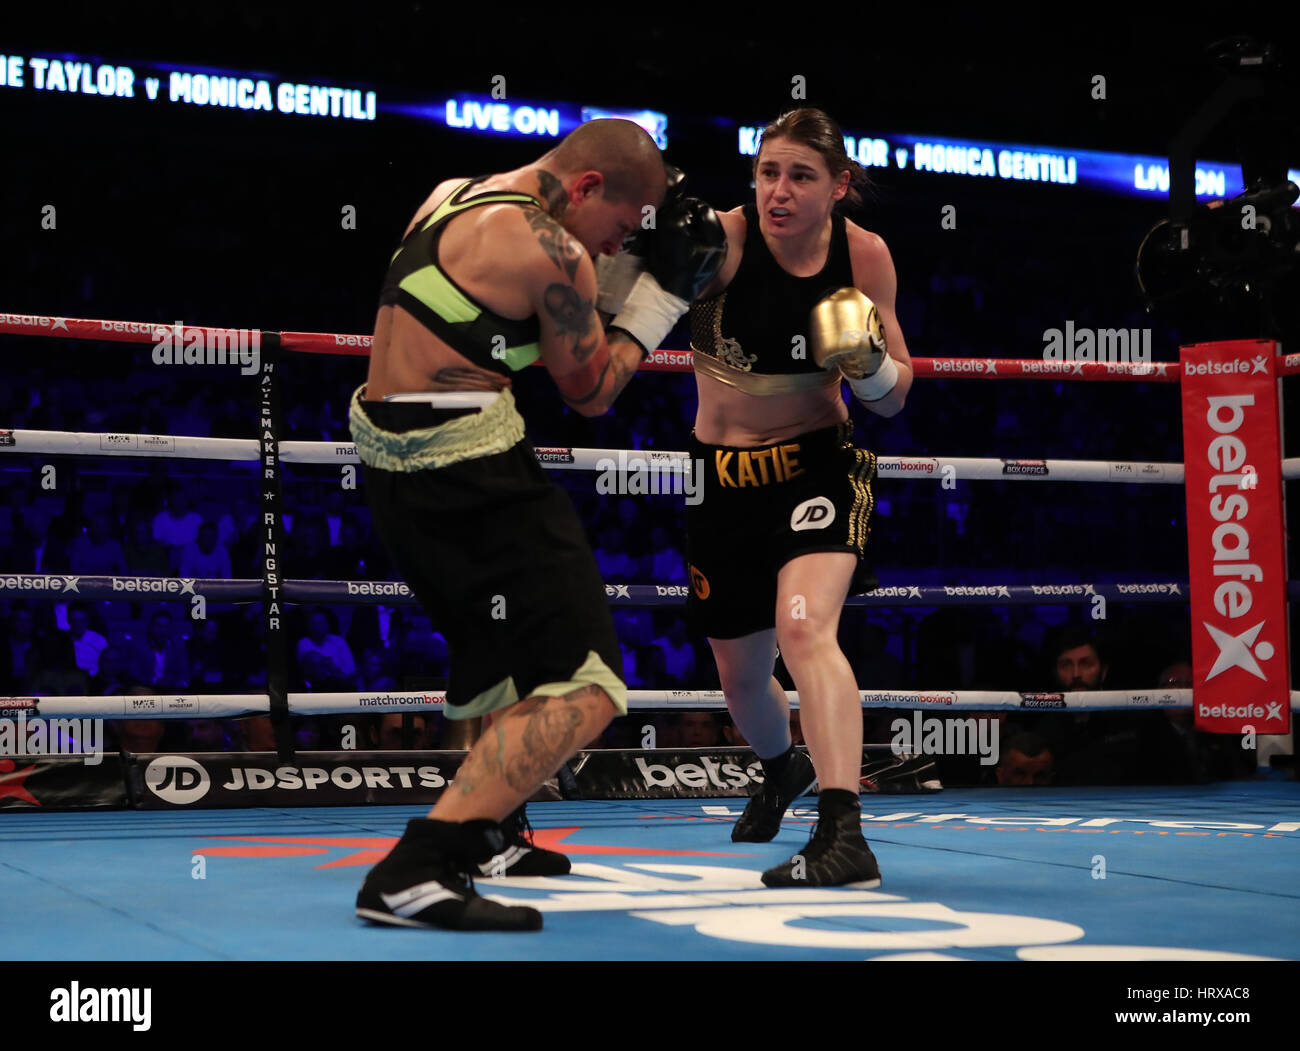 Katie Taylor (right) takes on Monica Gentili in the super-featherweight contest at The O2. PRESS ASSOCIATION Photo. Picture date: Saturday March 4, 2017. See PA story BOXING London. Photo credit should read: Nick Potts/PA Wire Stock Photo